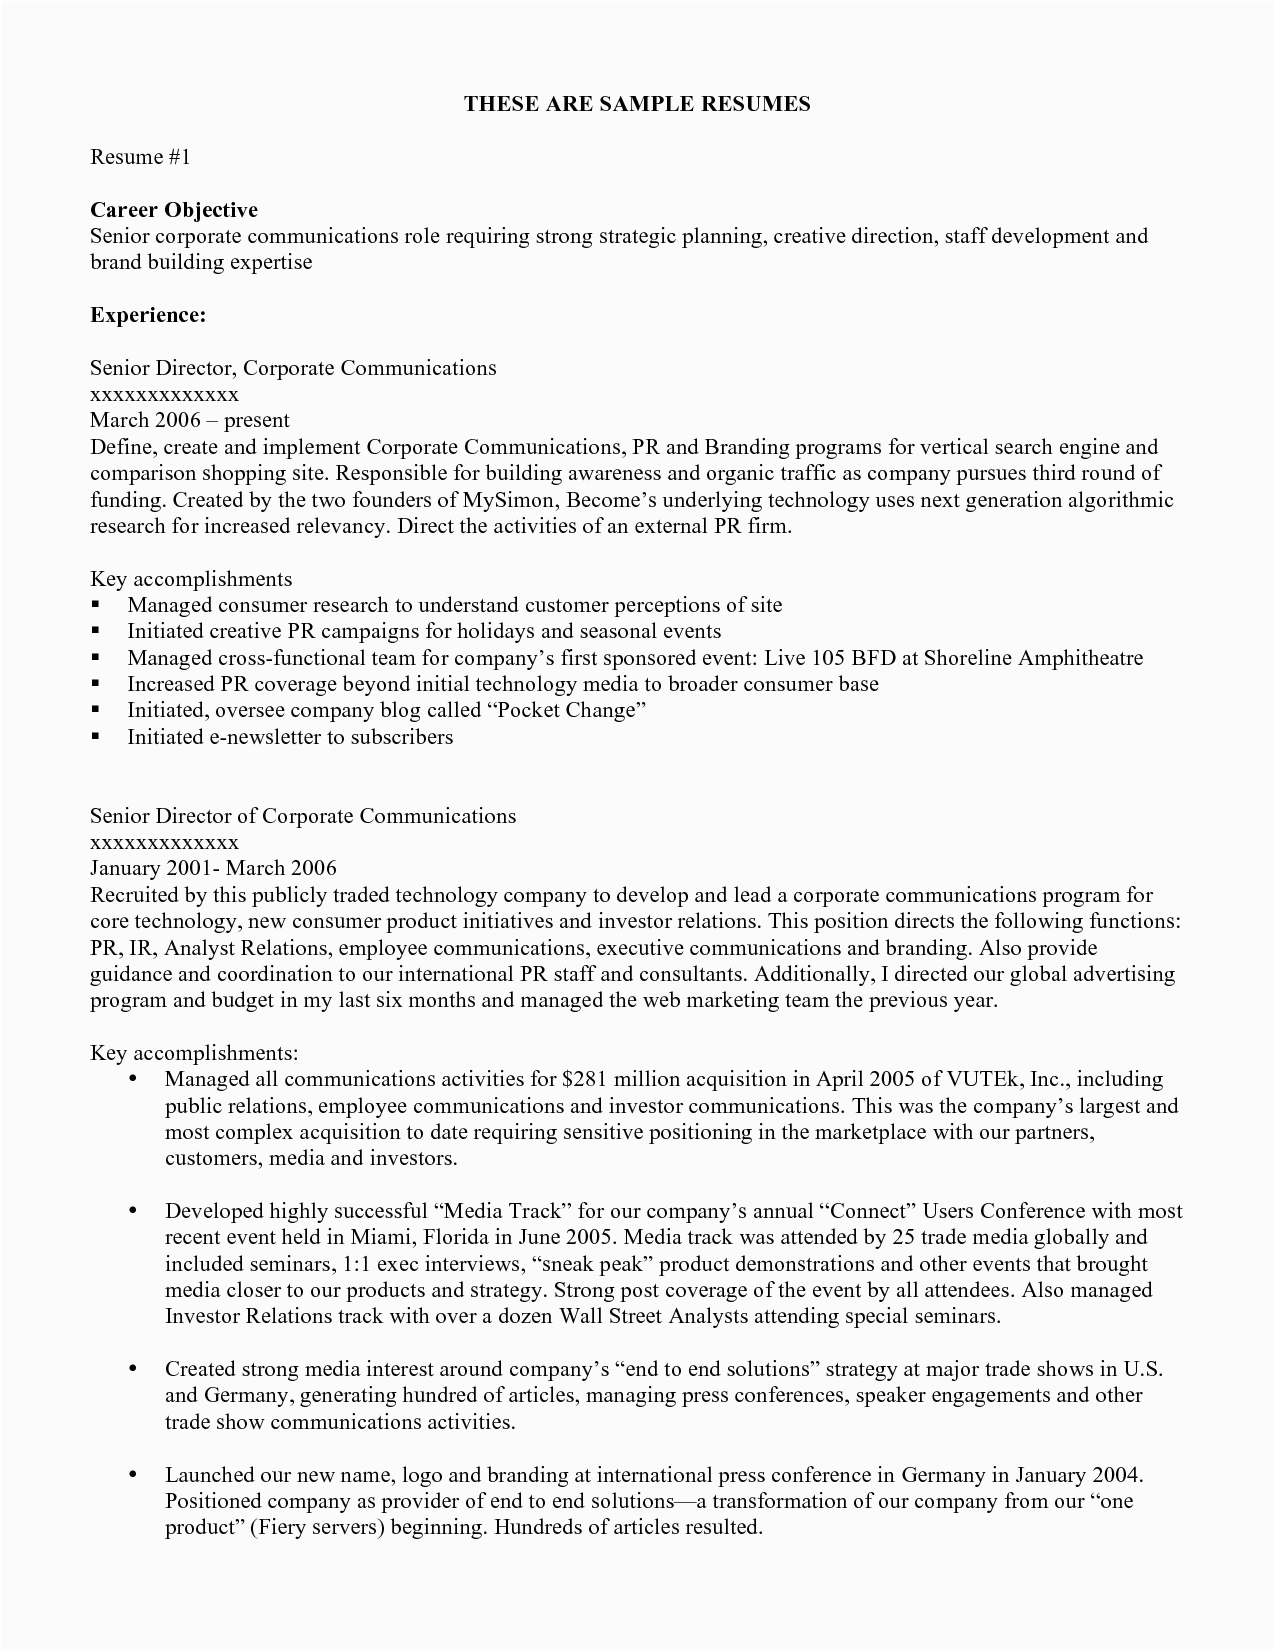 Sample Objective for Resume for Any Job How to Write A Job Objective for Resume